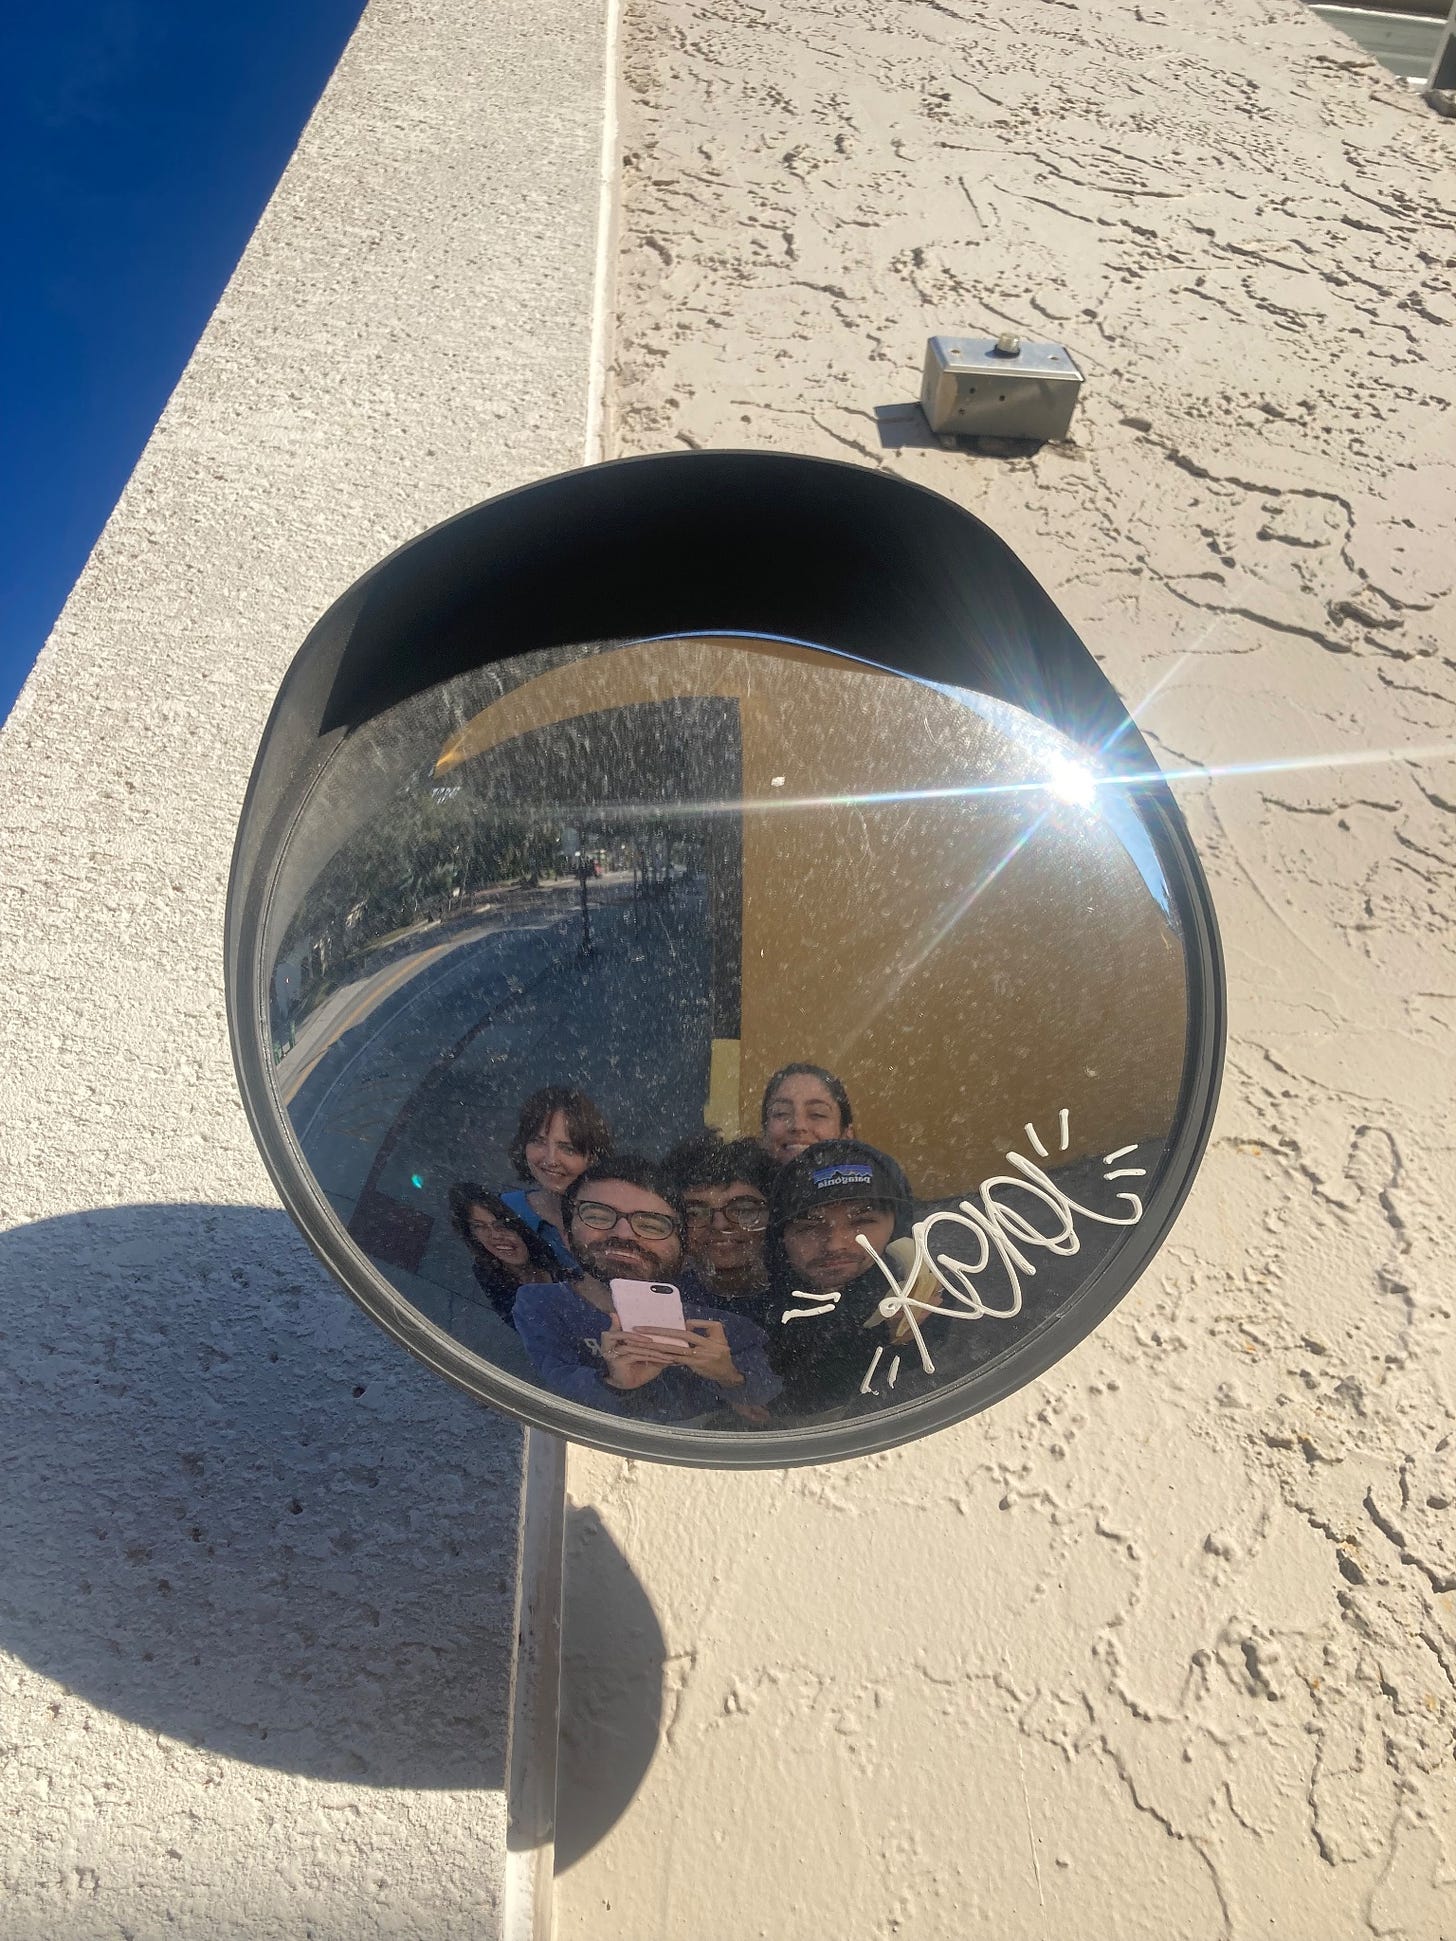 Jake and friends smile in the reflection of a convex mirror